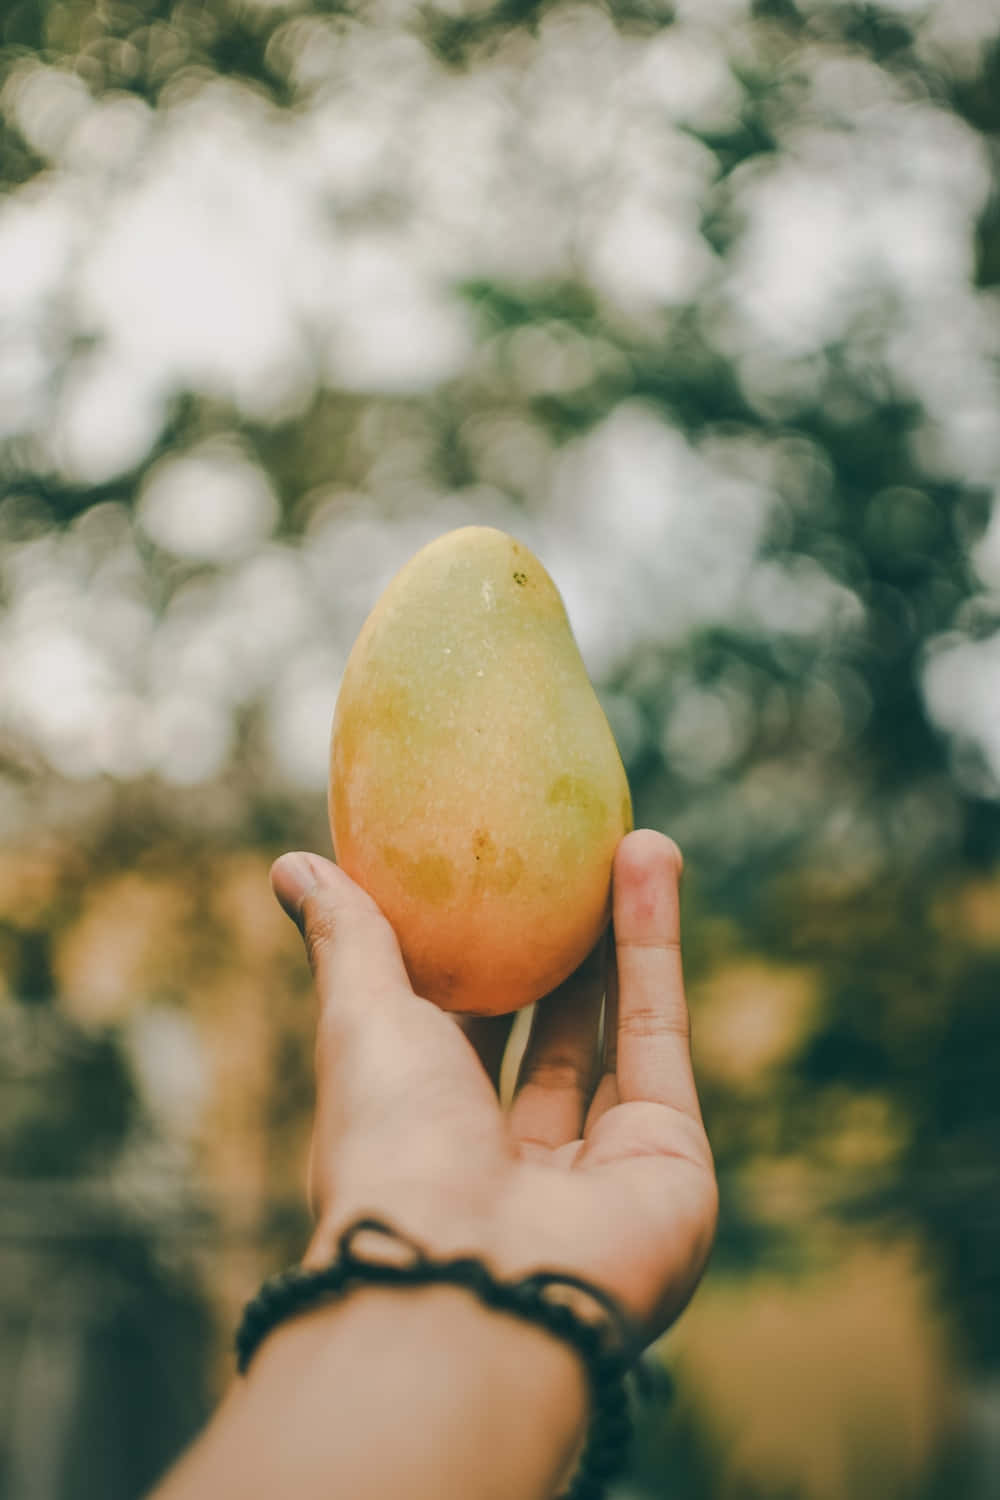 A Person Holding A Mango In Their Hand